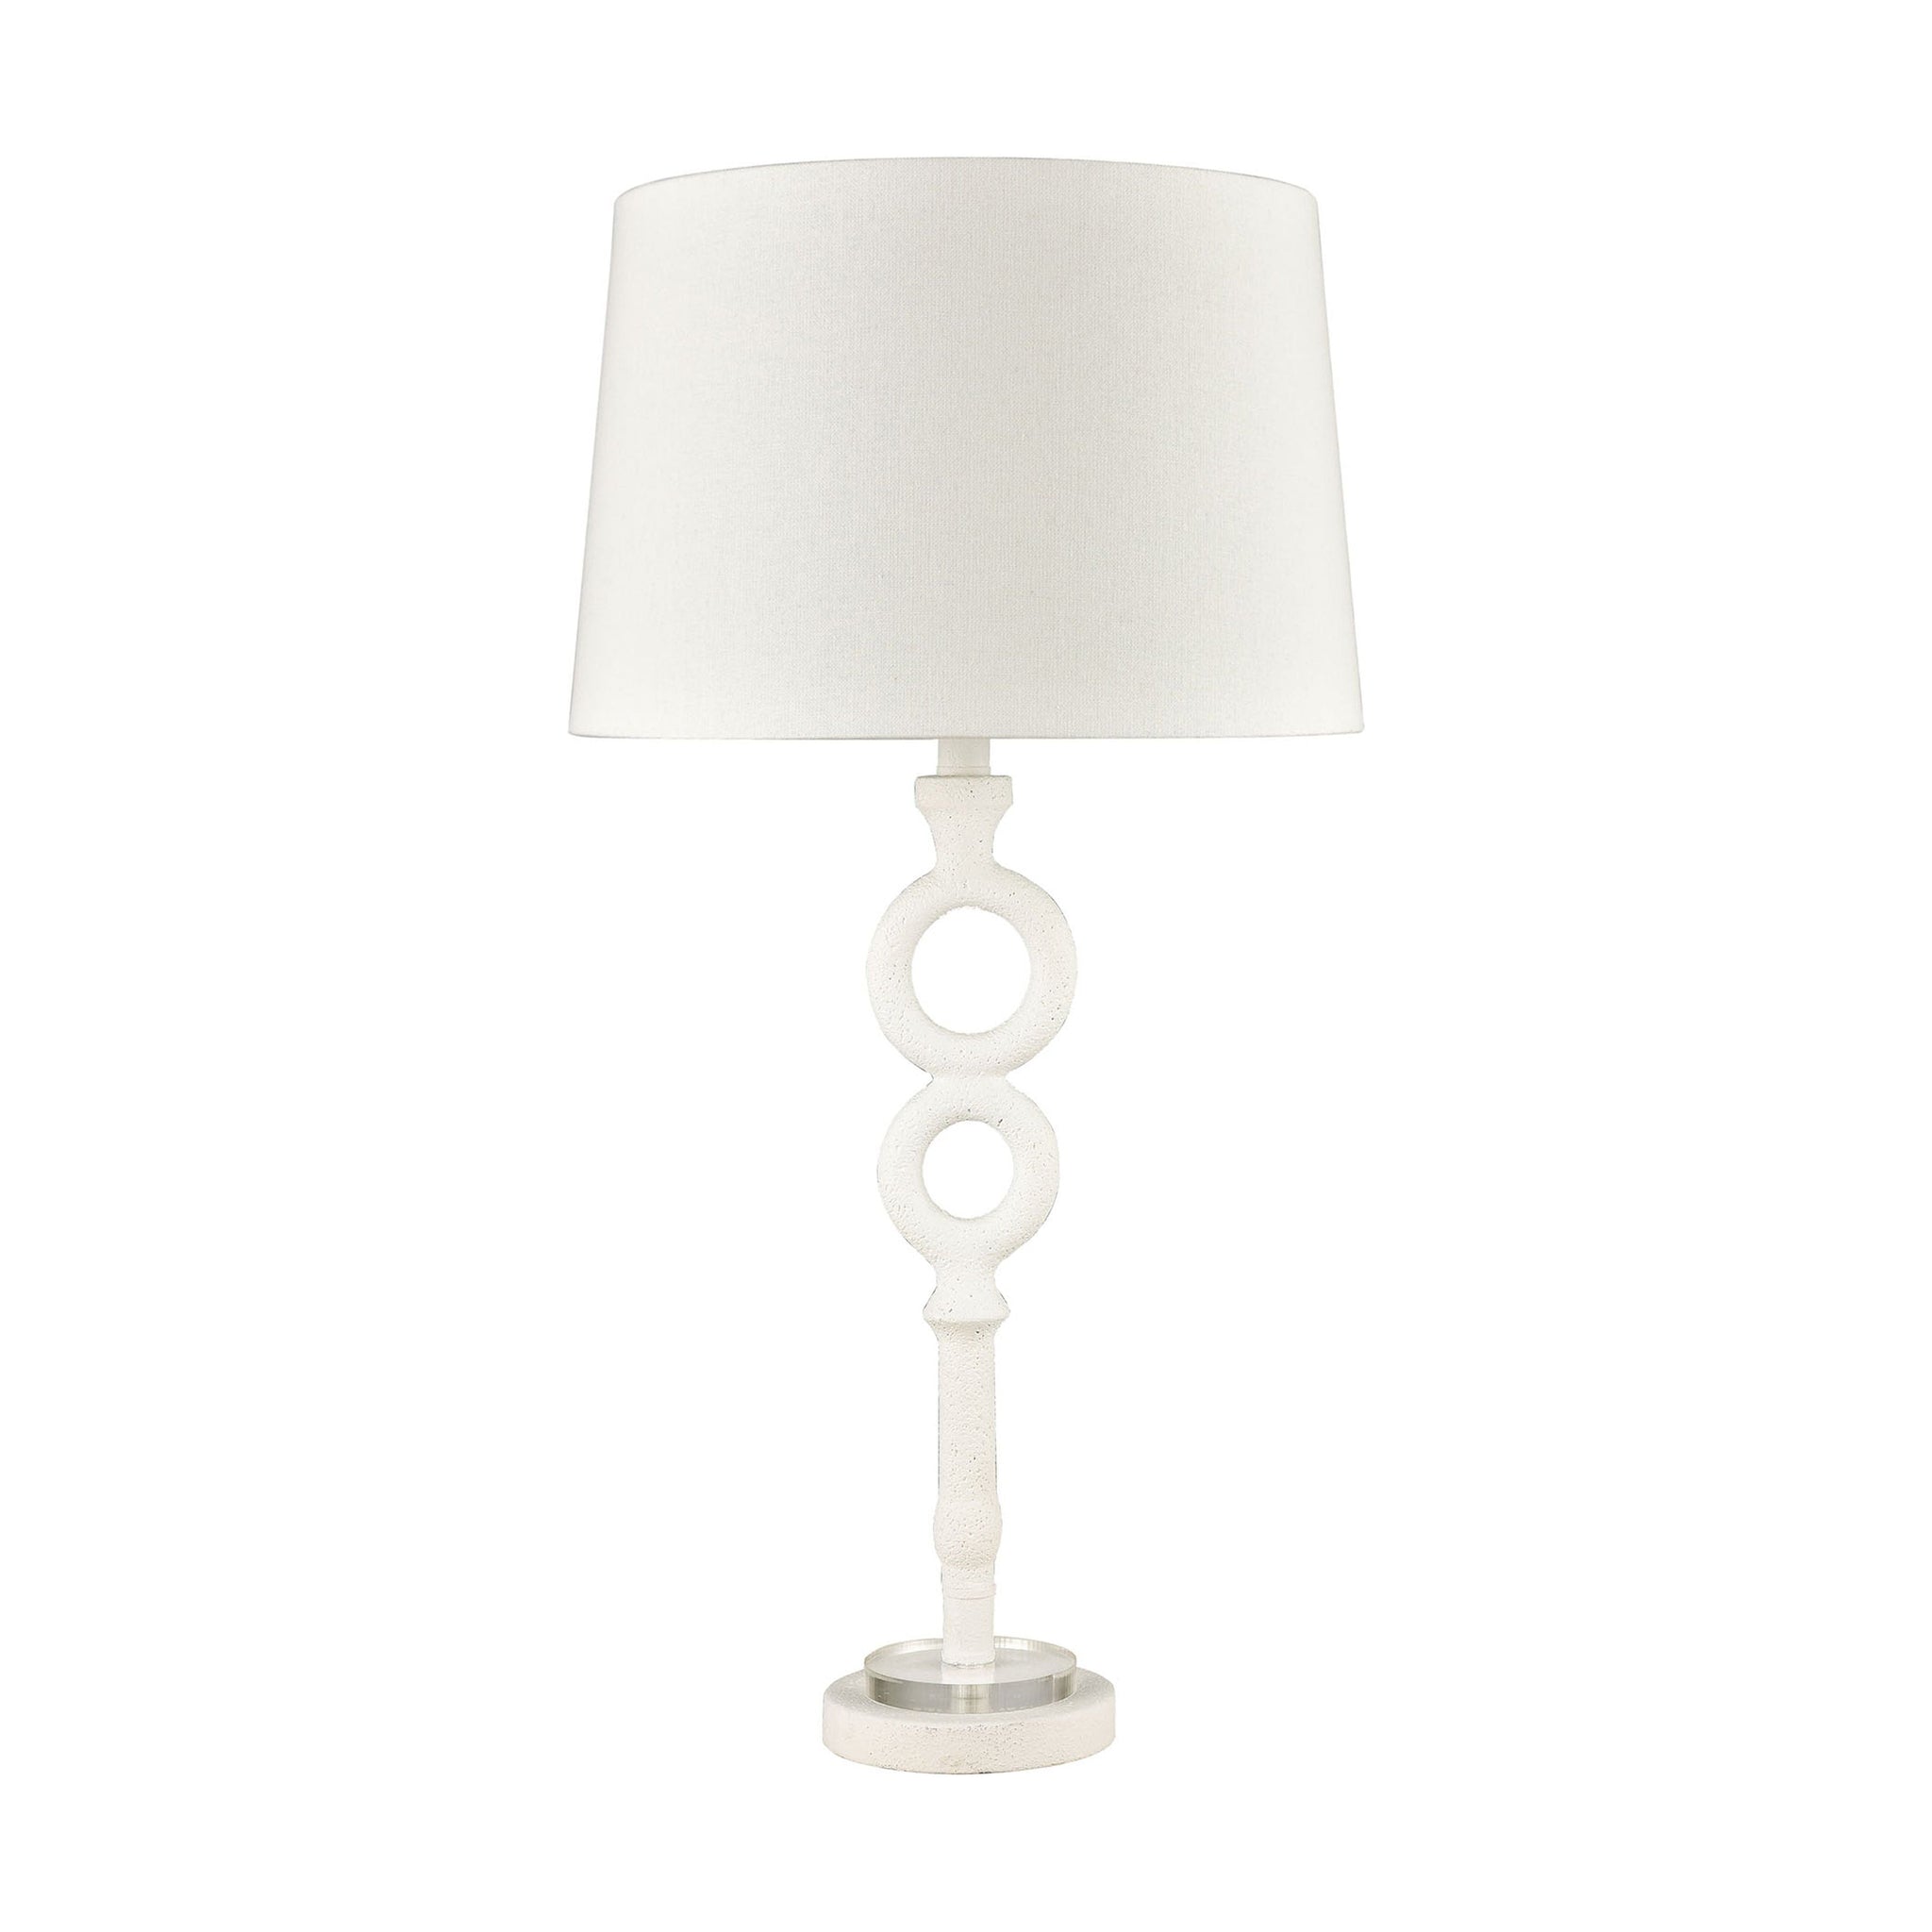 Hammered Home 33" High 1-Light Table Lamp